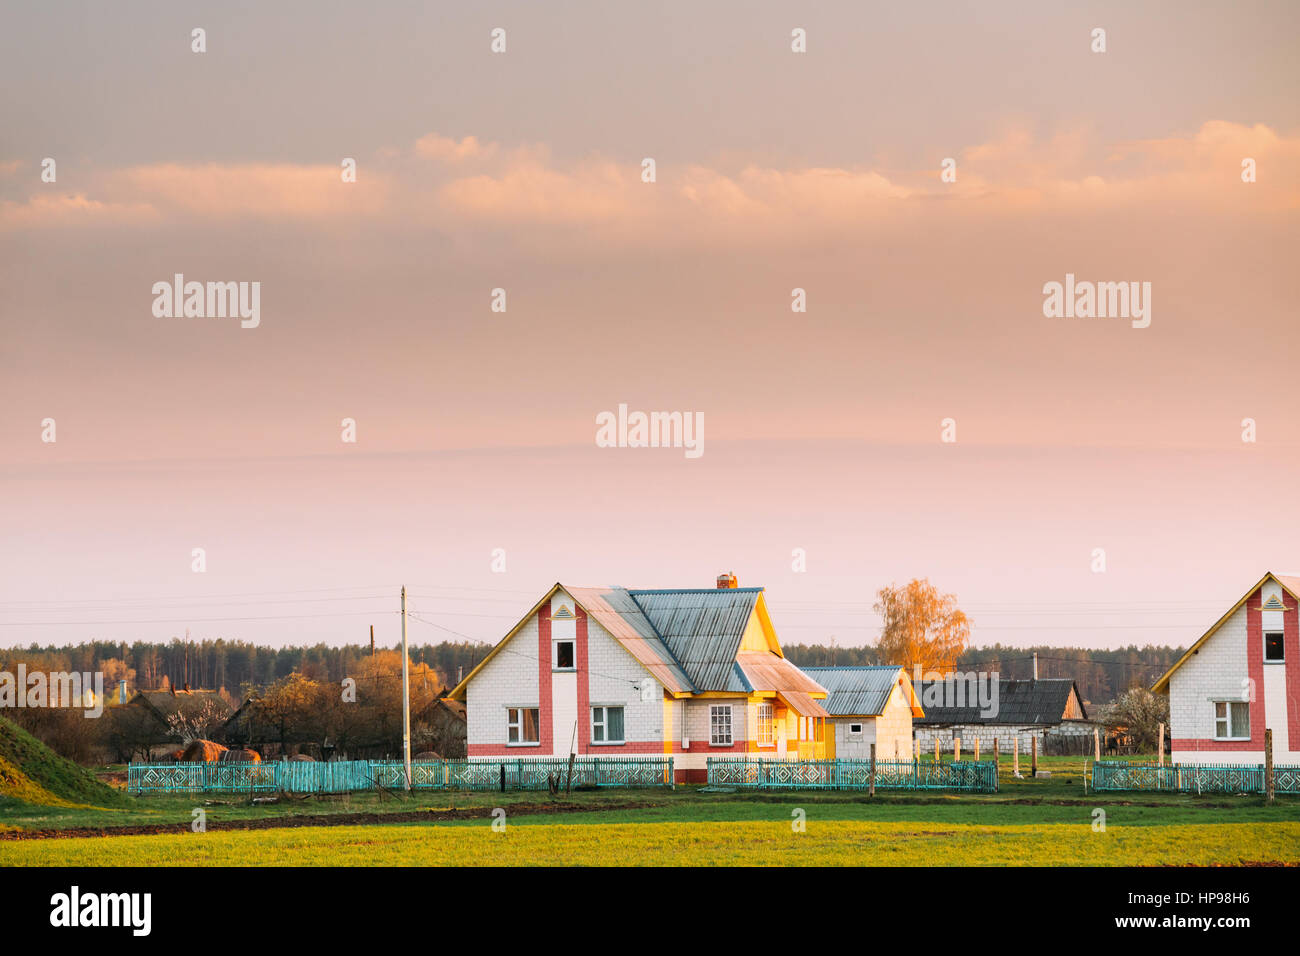 Typical Belarusian Or Russian Brick House In Village Or Countryside Of Belarus Or Russia Countries At Sunset Or Sunrise. Spring Or Summer Season Stock Photo